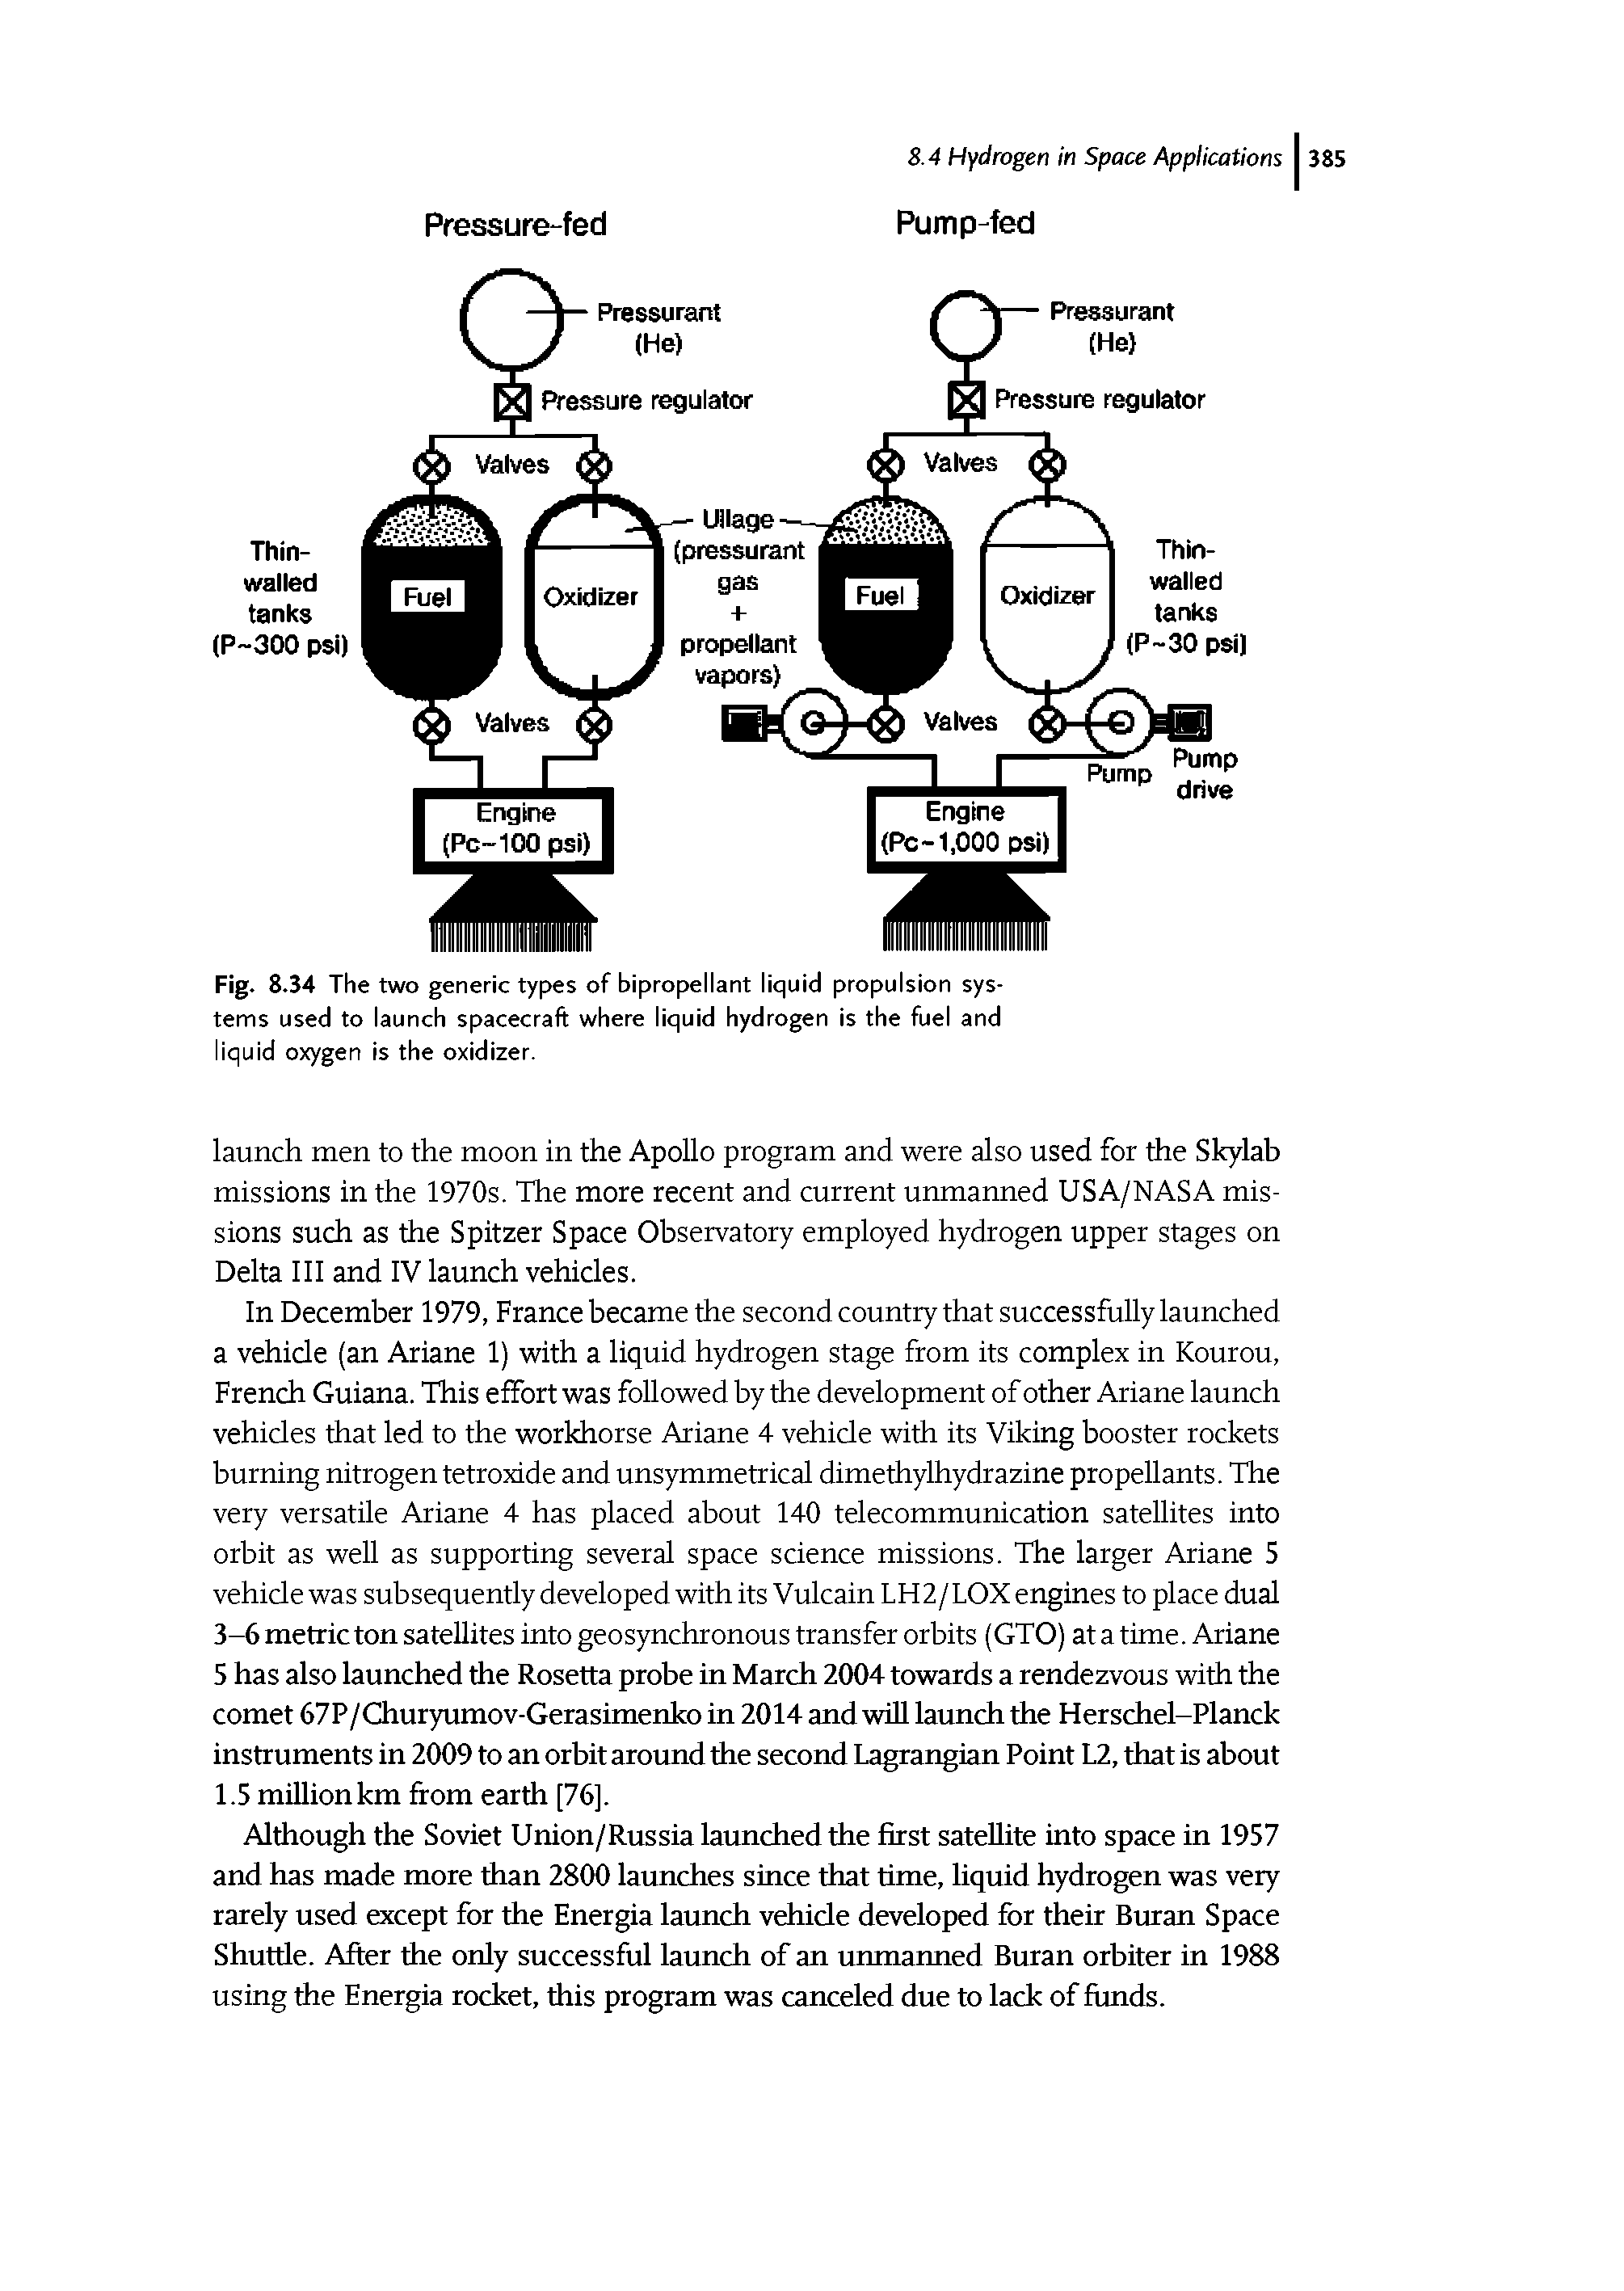 Fig. 8.34 The two generic types of bipropellant liquid propulsion systems used to launch spacecraft where liquid hydrogen is the fuel and liquid oxygen is the oxidizer.